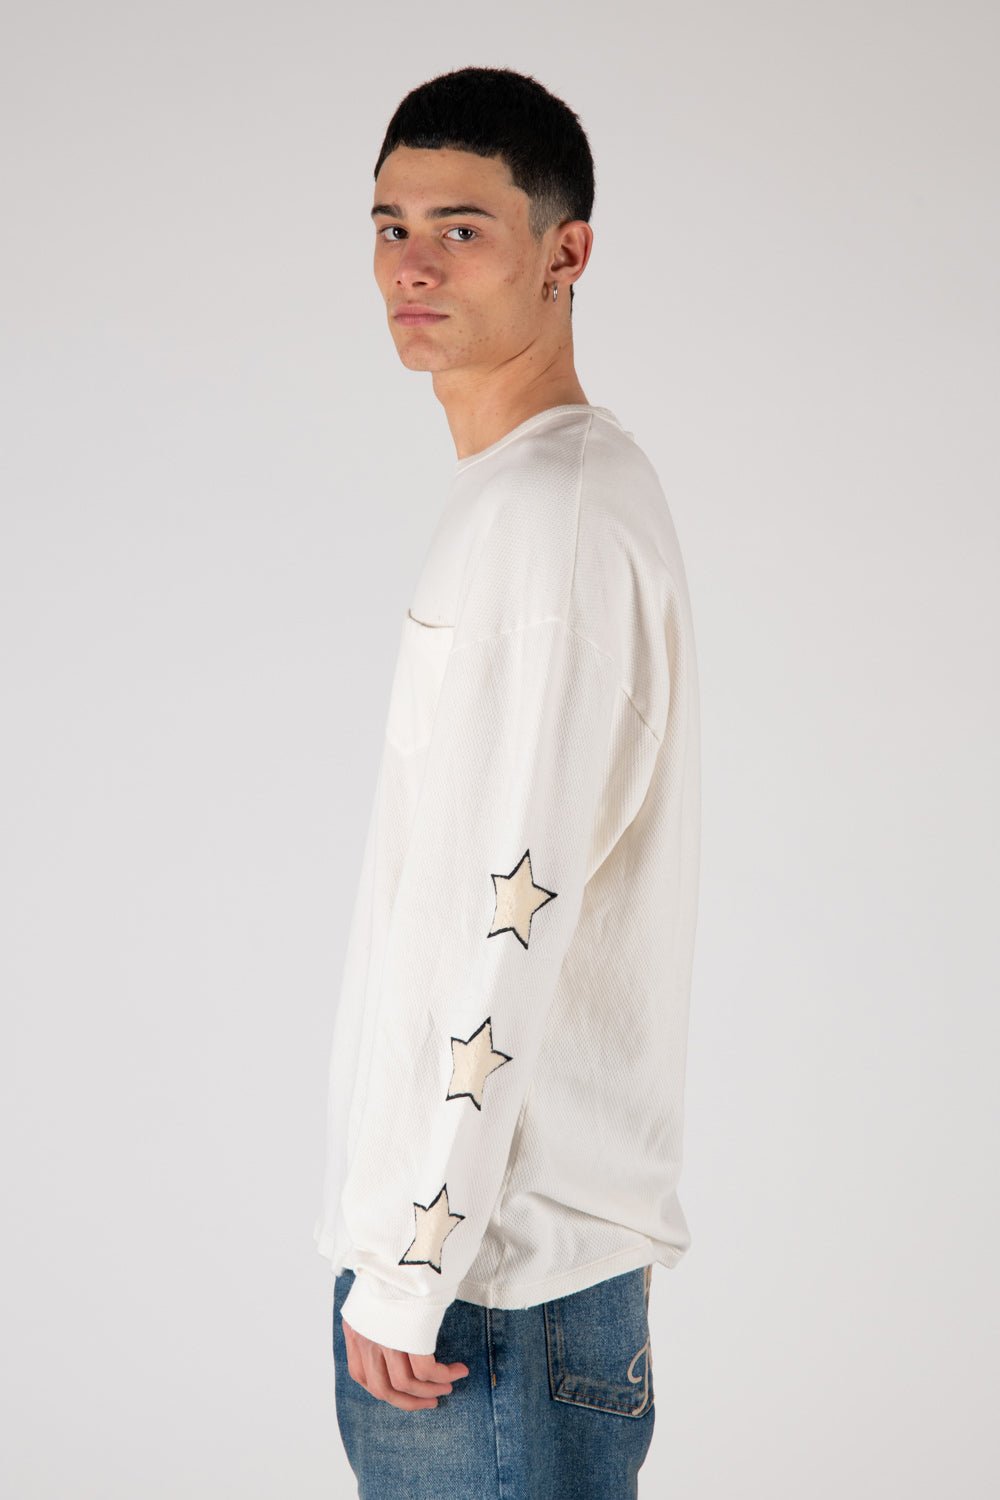 LUCKY KID - STARS Regular fit long sleeve t-shirt printed on the front. Stars patches on the sleeves. Composition: 100% Cotton HTC LOS ANGELES